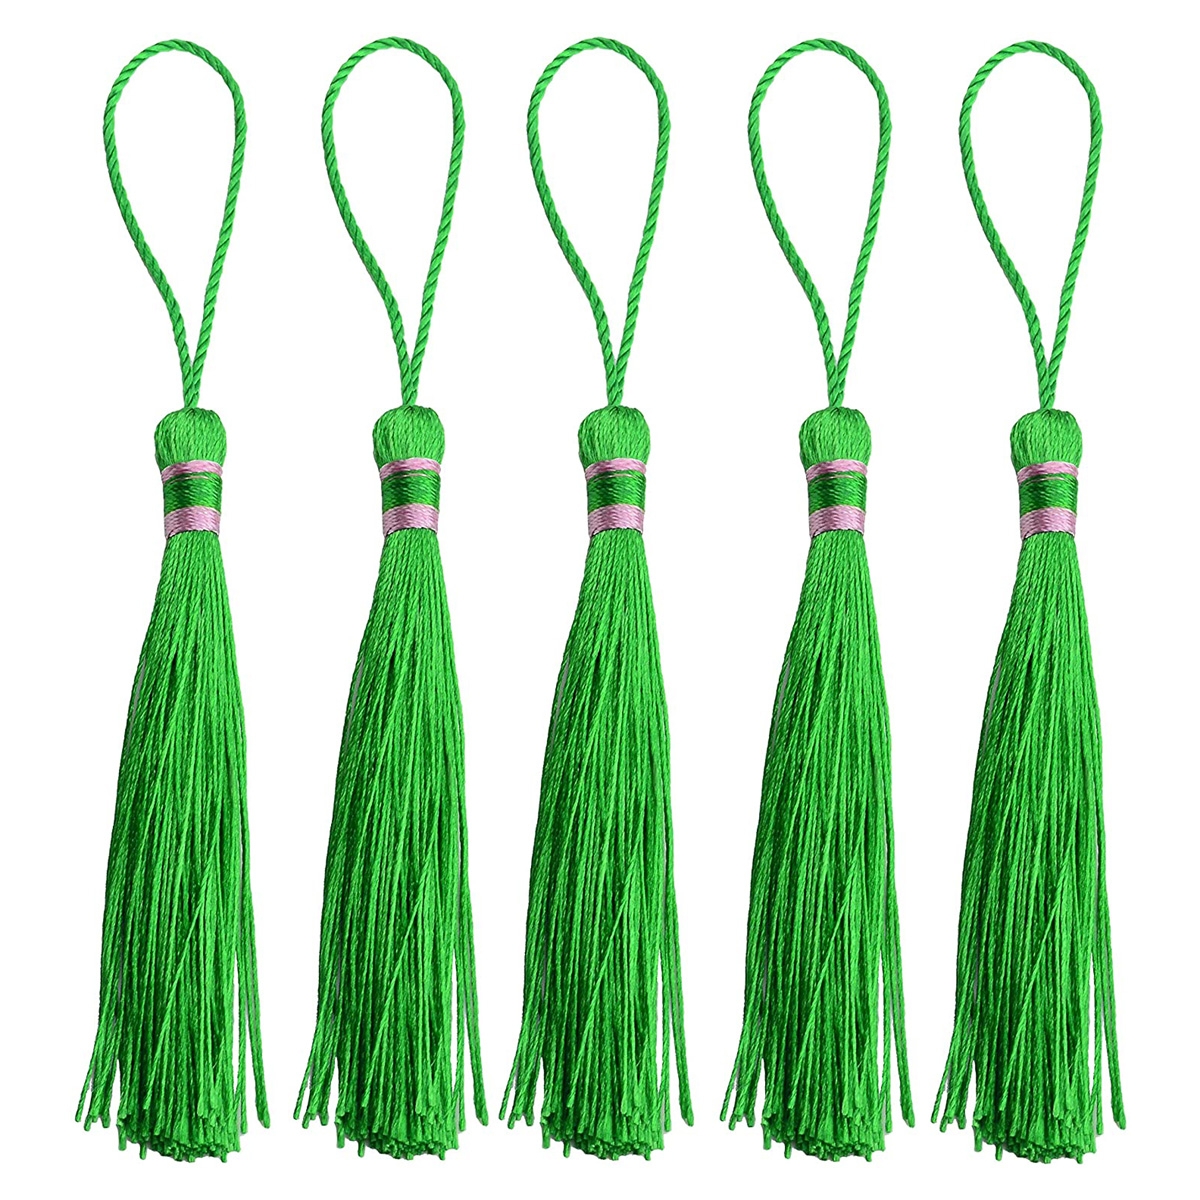 5.5 Inch Silky Floss Bookmark Tassels with Cord  Souvenir, Bookmarks, DIY Craft Accessory (Green)